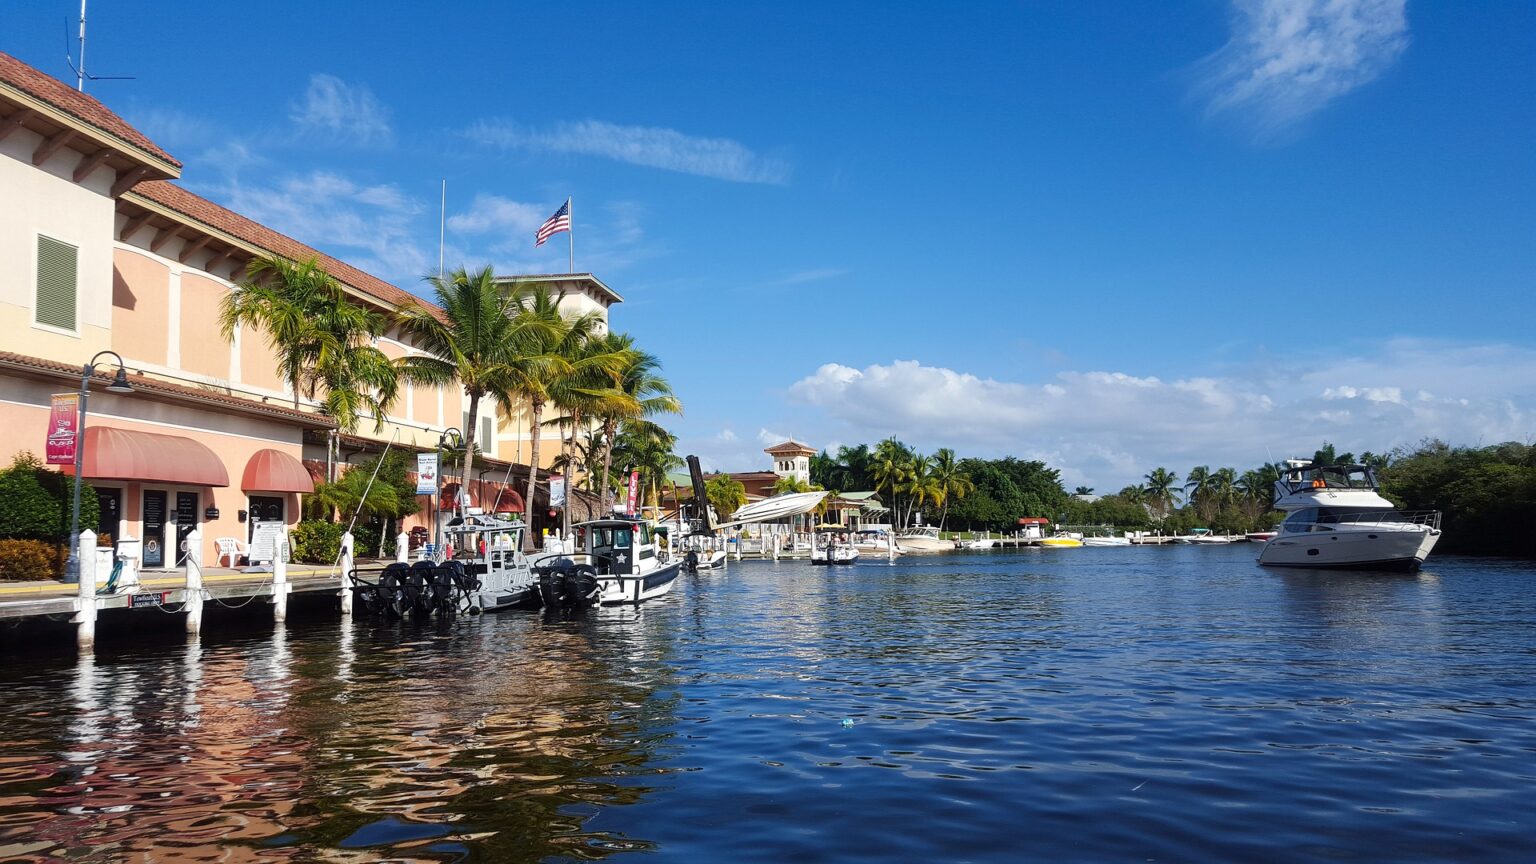 Boating in Florida 9 Places You Need to Visit - Traveling in Heels